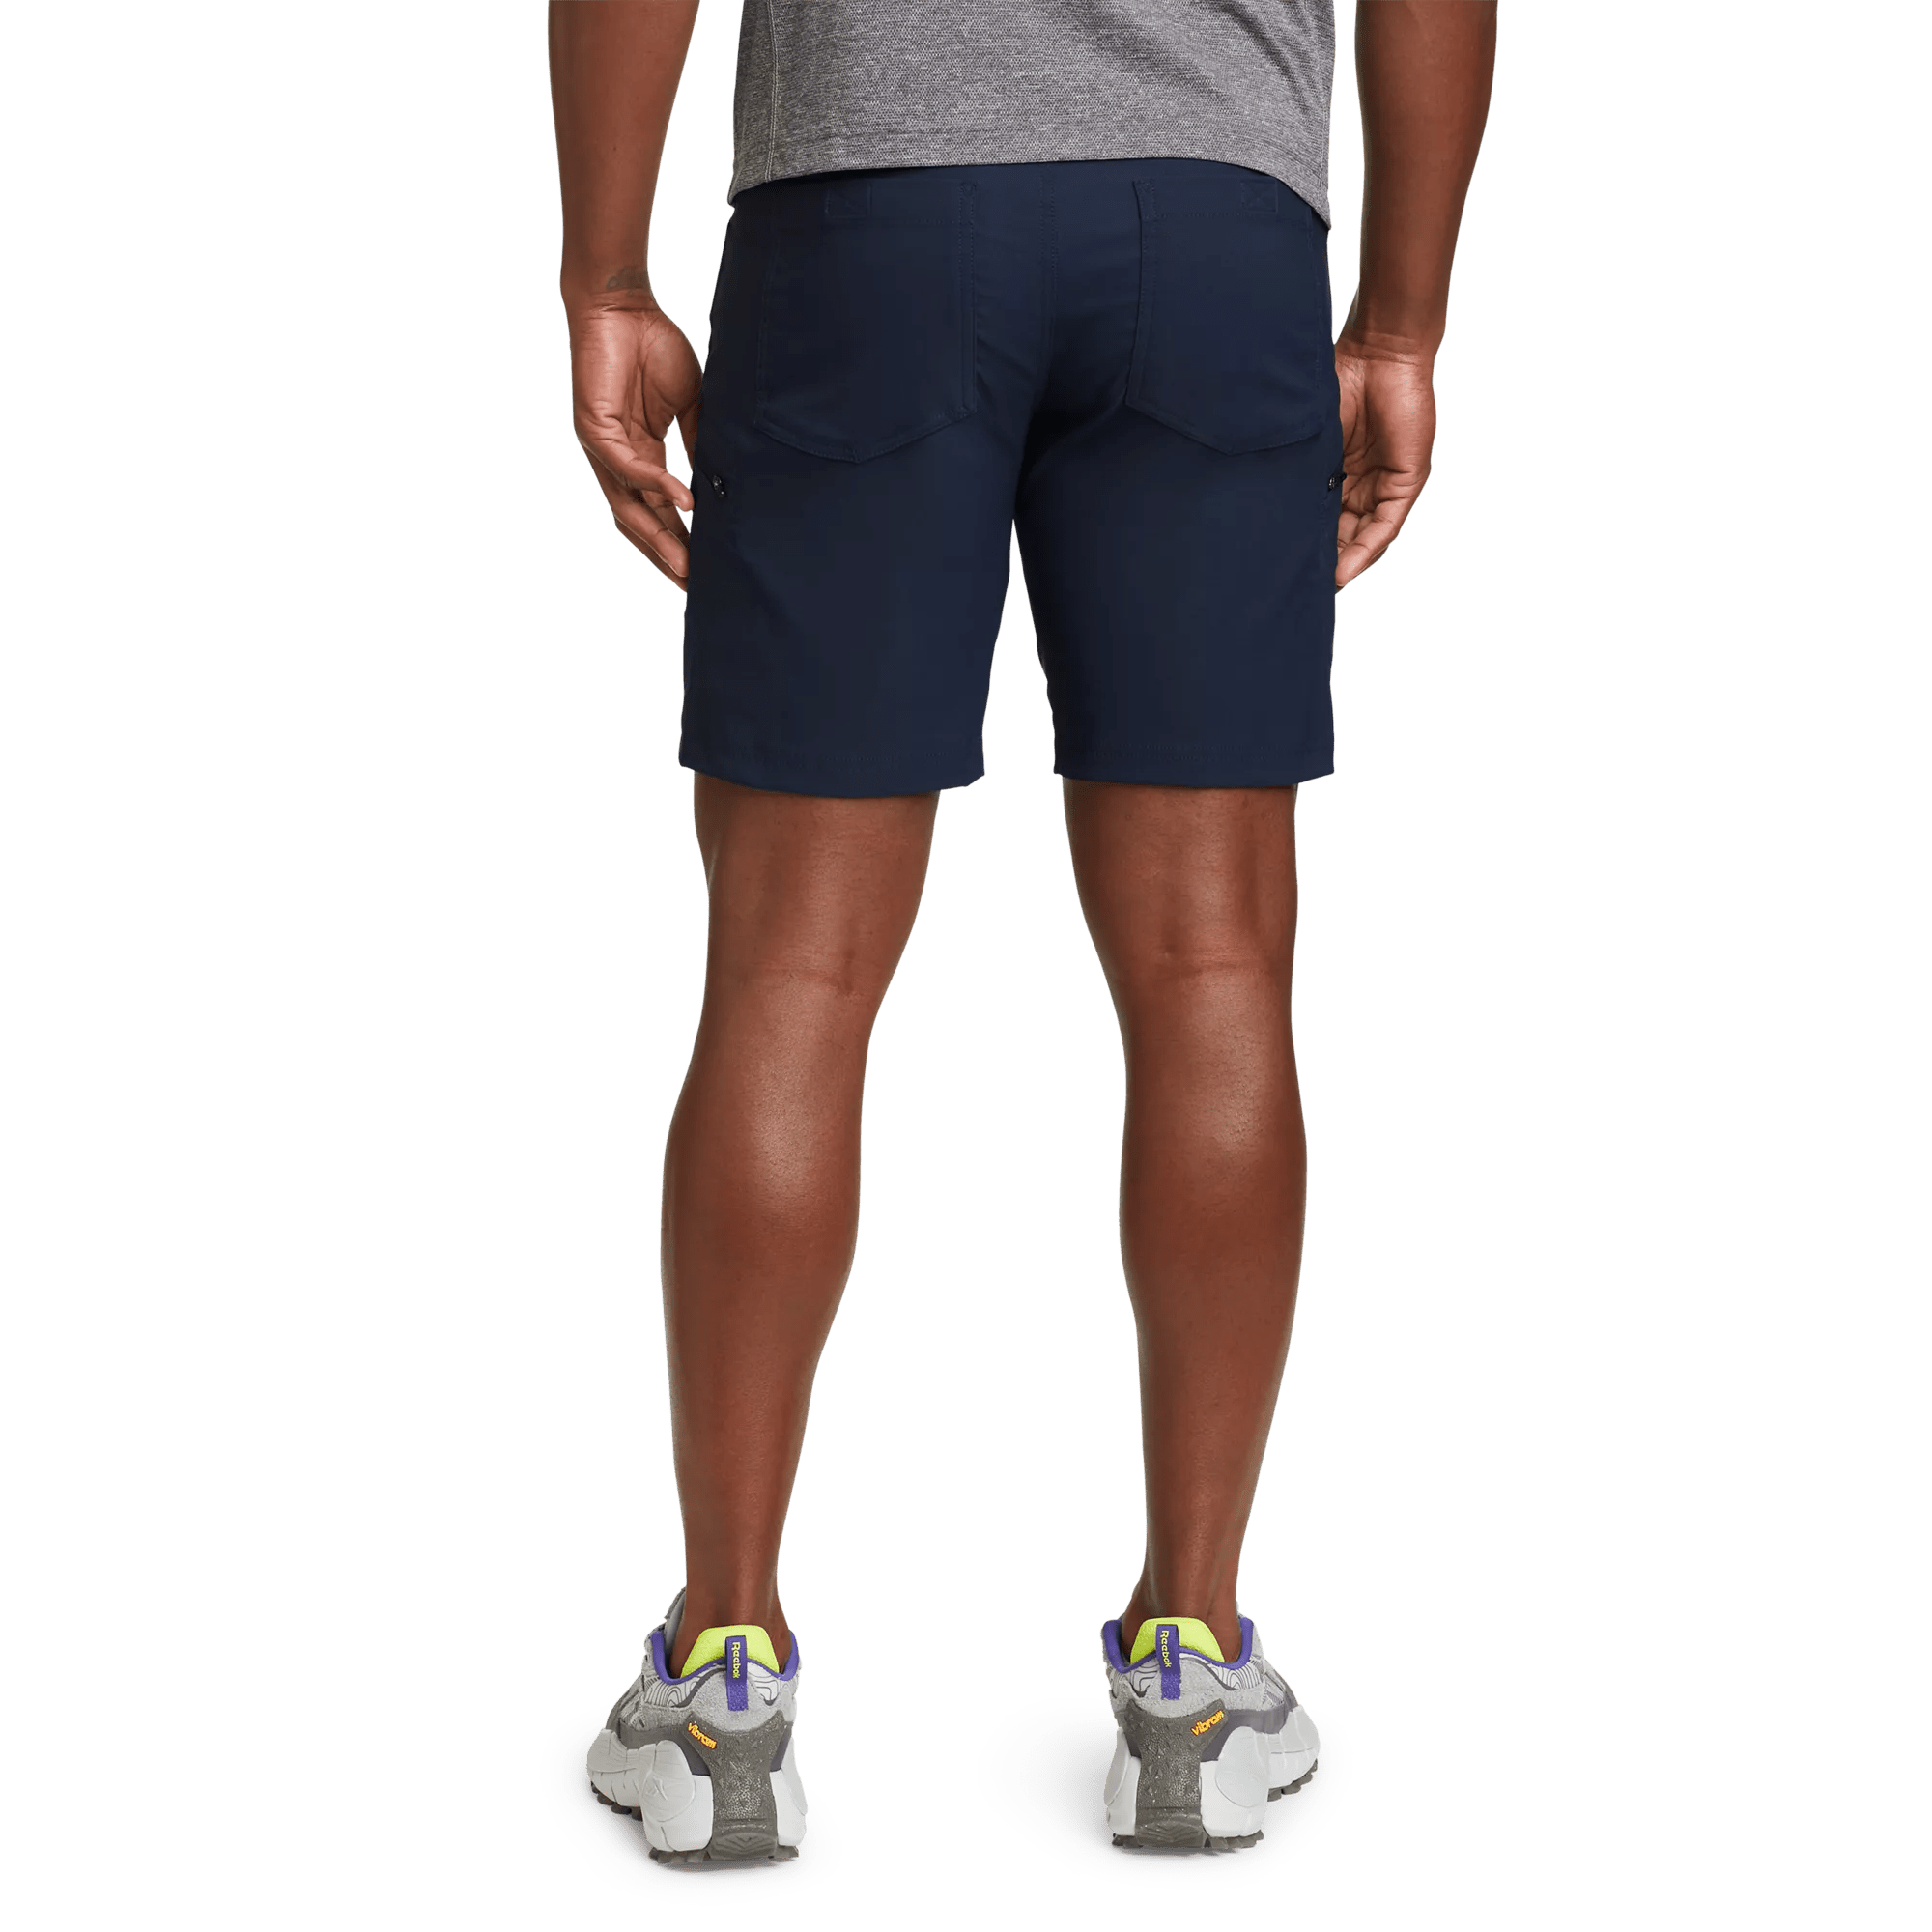 Guide Pro Shorts - 9"